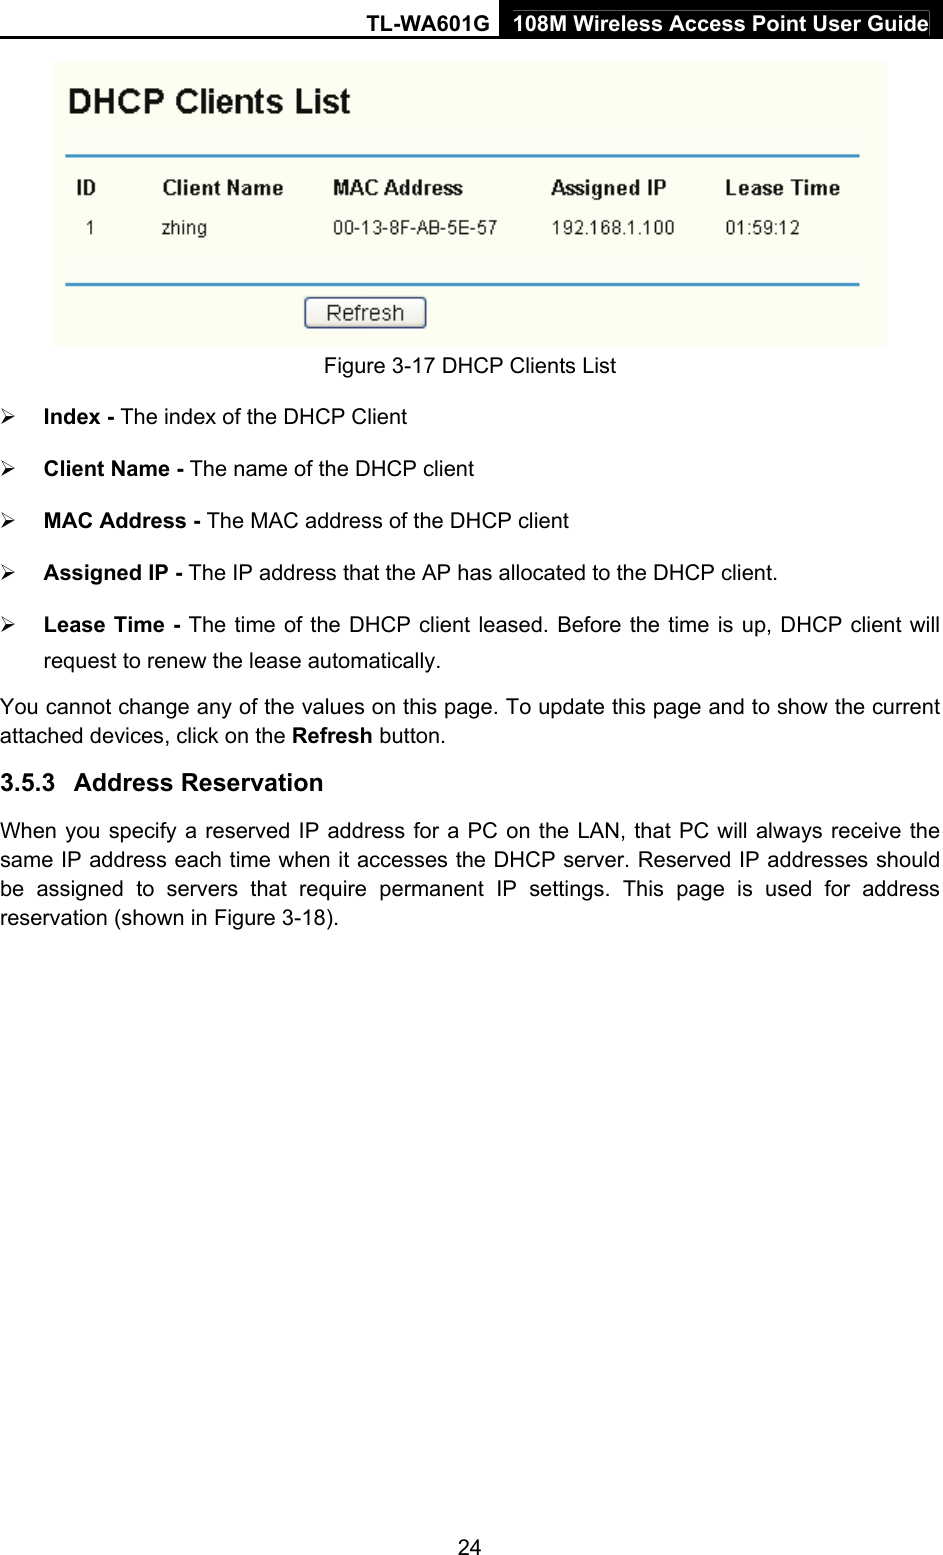 TL-WA601G 108M Wireless Access Point User Guide  24 Figure 3-17 DHCP Clients List ¾ Index - The index of the DHCP Client   ¾ Client Name - The name of the DHCP client   ¾ MAC Address - The MAC address of the DHCP client   ¾ Assigned IP - The IP address that the AP has allocated to the DHCP client. ¾ Lease Time - The time of the DHCP client leased. Before the time is up, DHCP client will request to renew the lease automatically. You cannot change any of the values on this page. To update this page and to show the current attached devices, click on the Refresh button. 3.5.3  Address Reservation When you specify a reserved IP address for a PC on the LAN, that PC will always receive the same IP address each time when it accesses the DHCP server. Reserved IP addresses should be assigned to servers that require permanent IP settings. This page is used for address reservation (shown in Figure 3-18). 